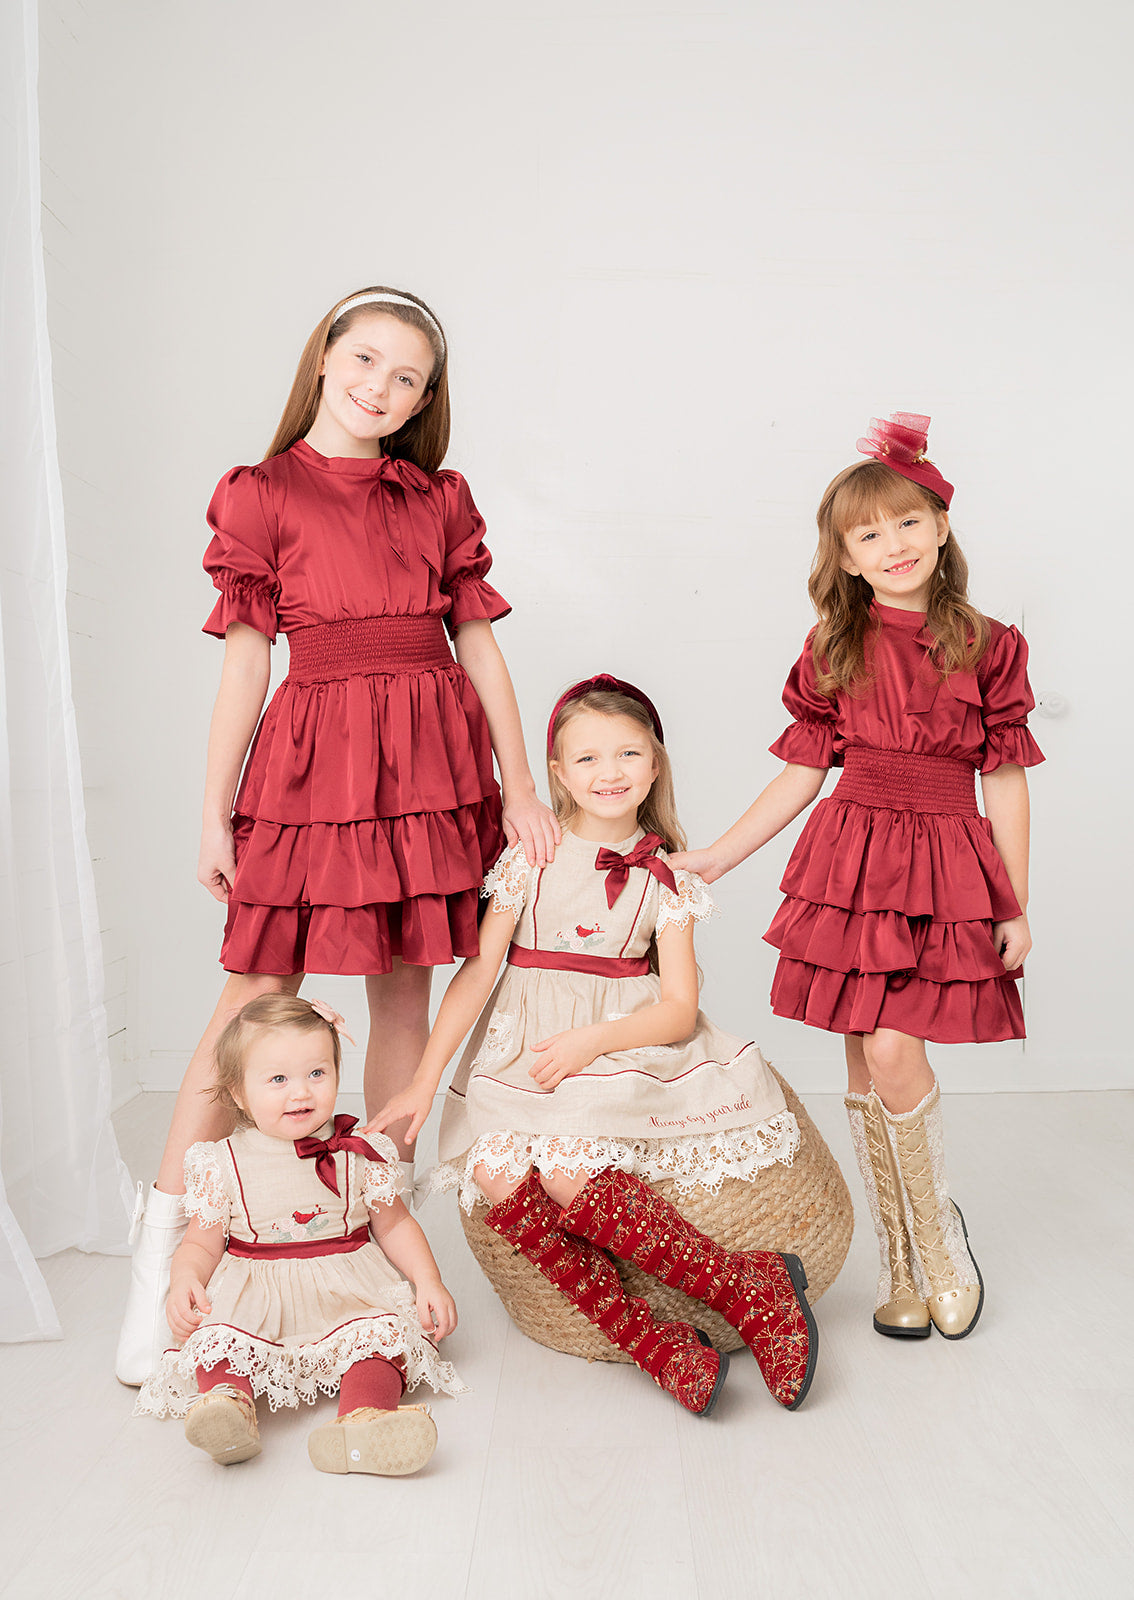 "Always By Your Side" Satin Simplicity Dress in Cranberry - Evie's Closet Clothing